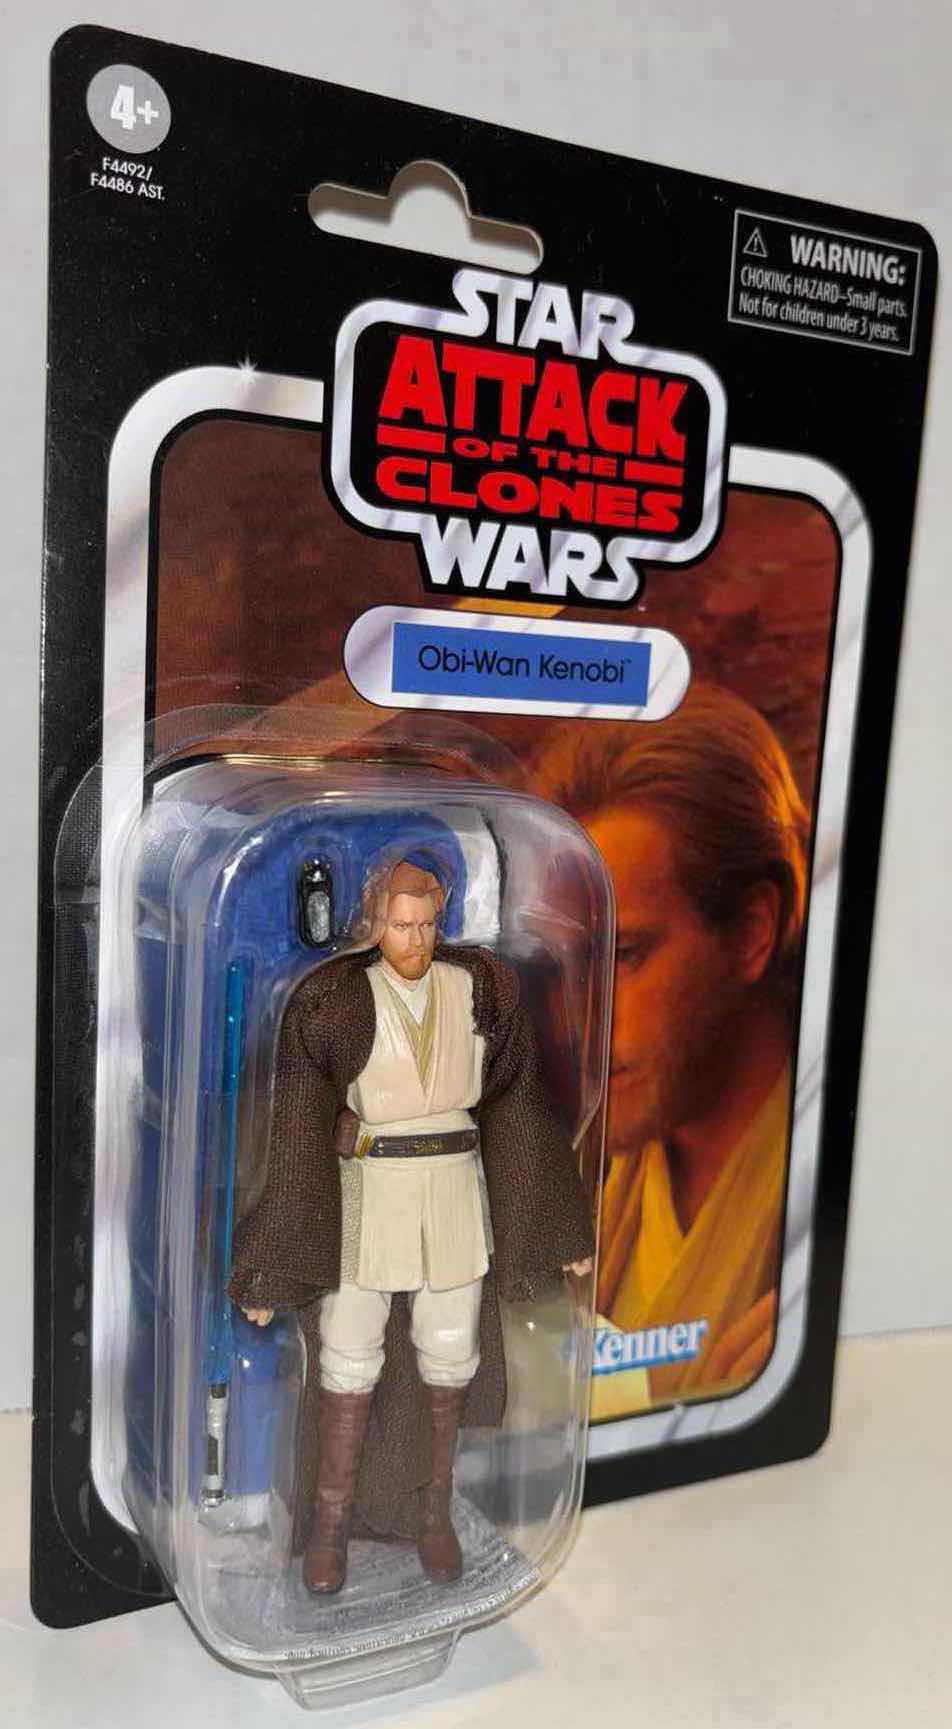 Photo 1 of NEW STAR WARS ATTACK OF THE CLONES 3.75” THE VINTAGE COLLECTION ACTION FIGURE & ACCESSORIES, “OBI-WAN KENOBI” (1)